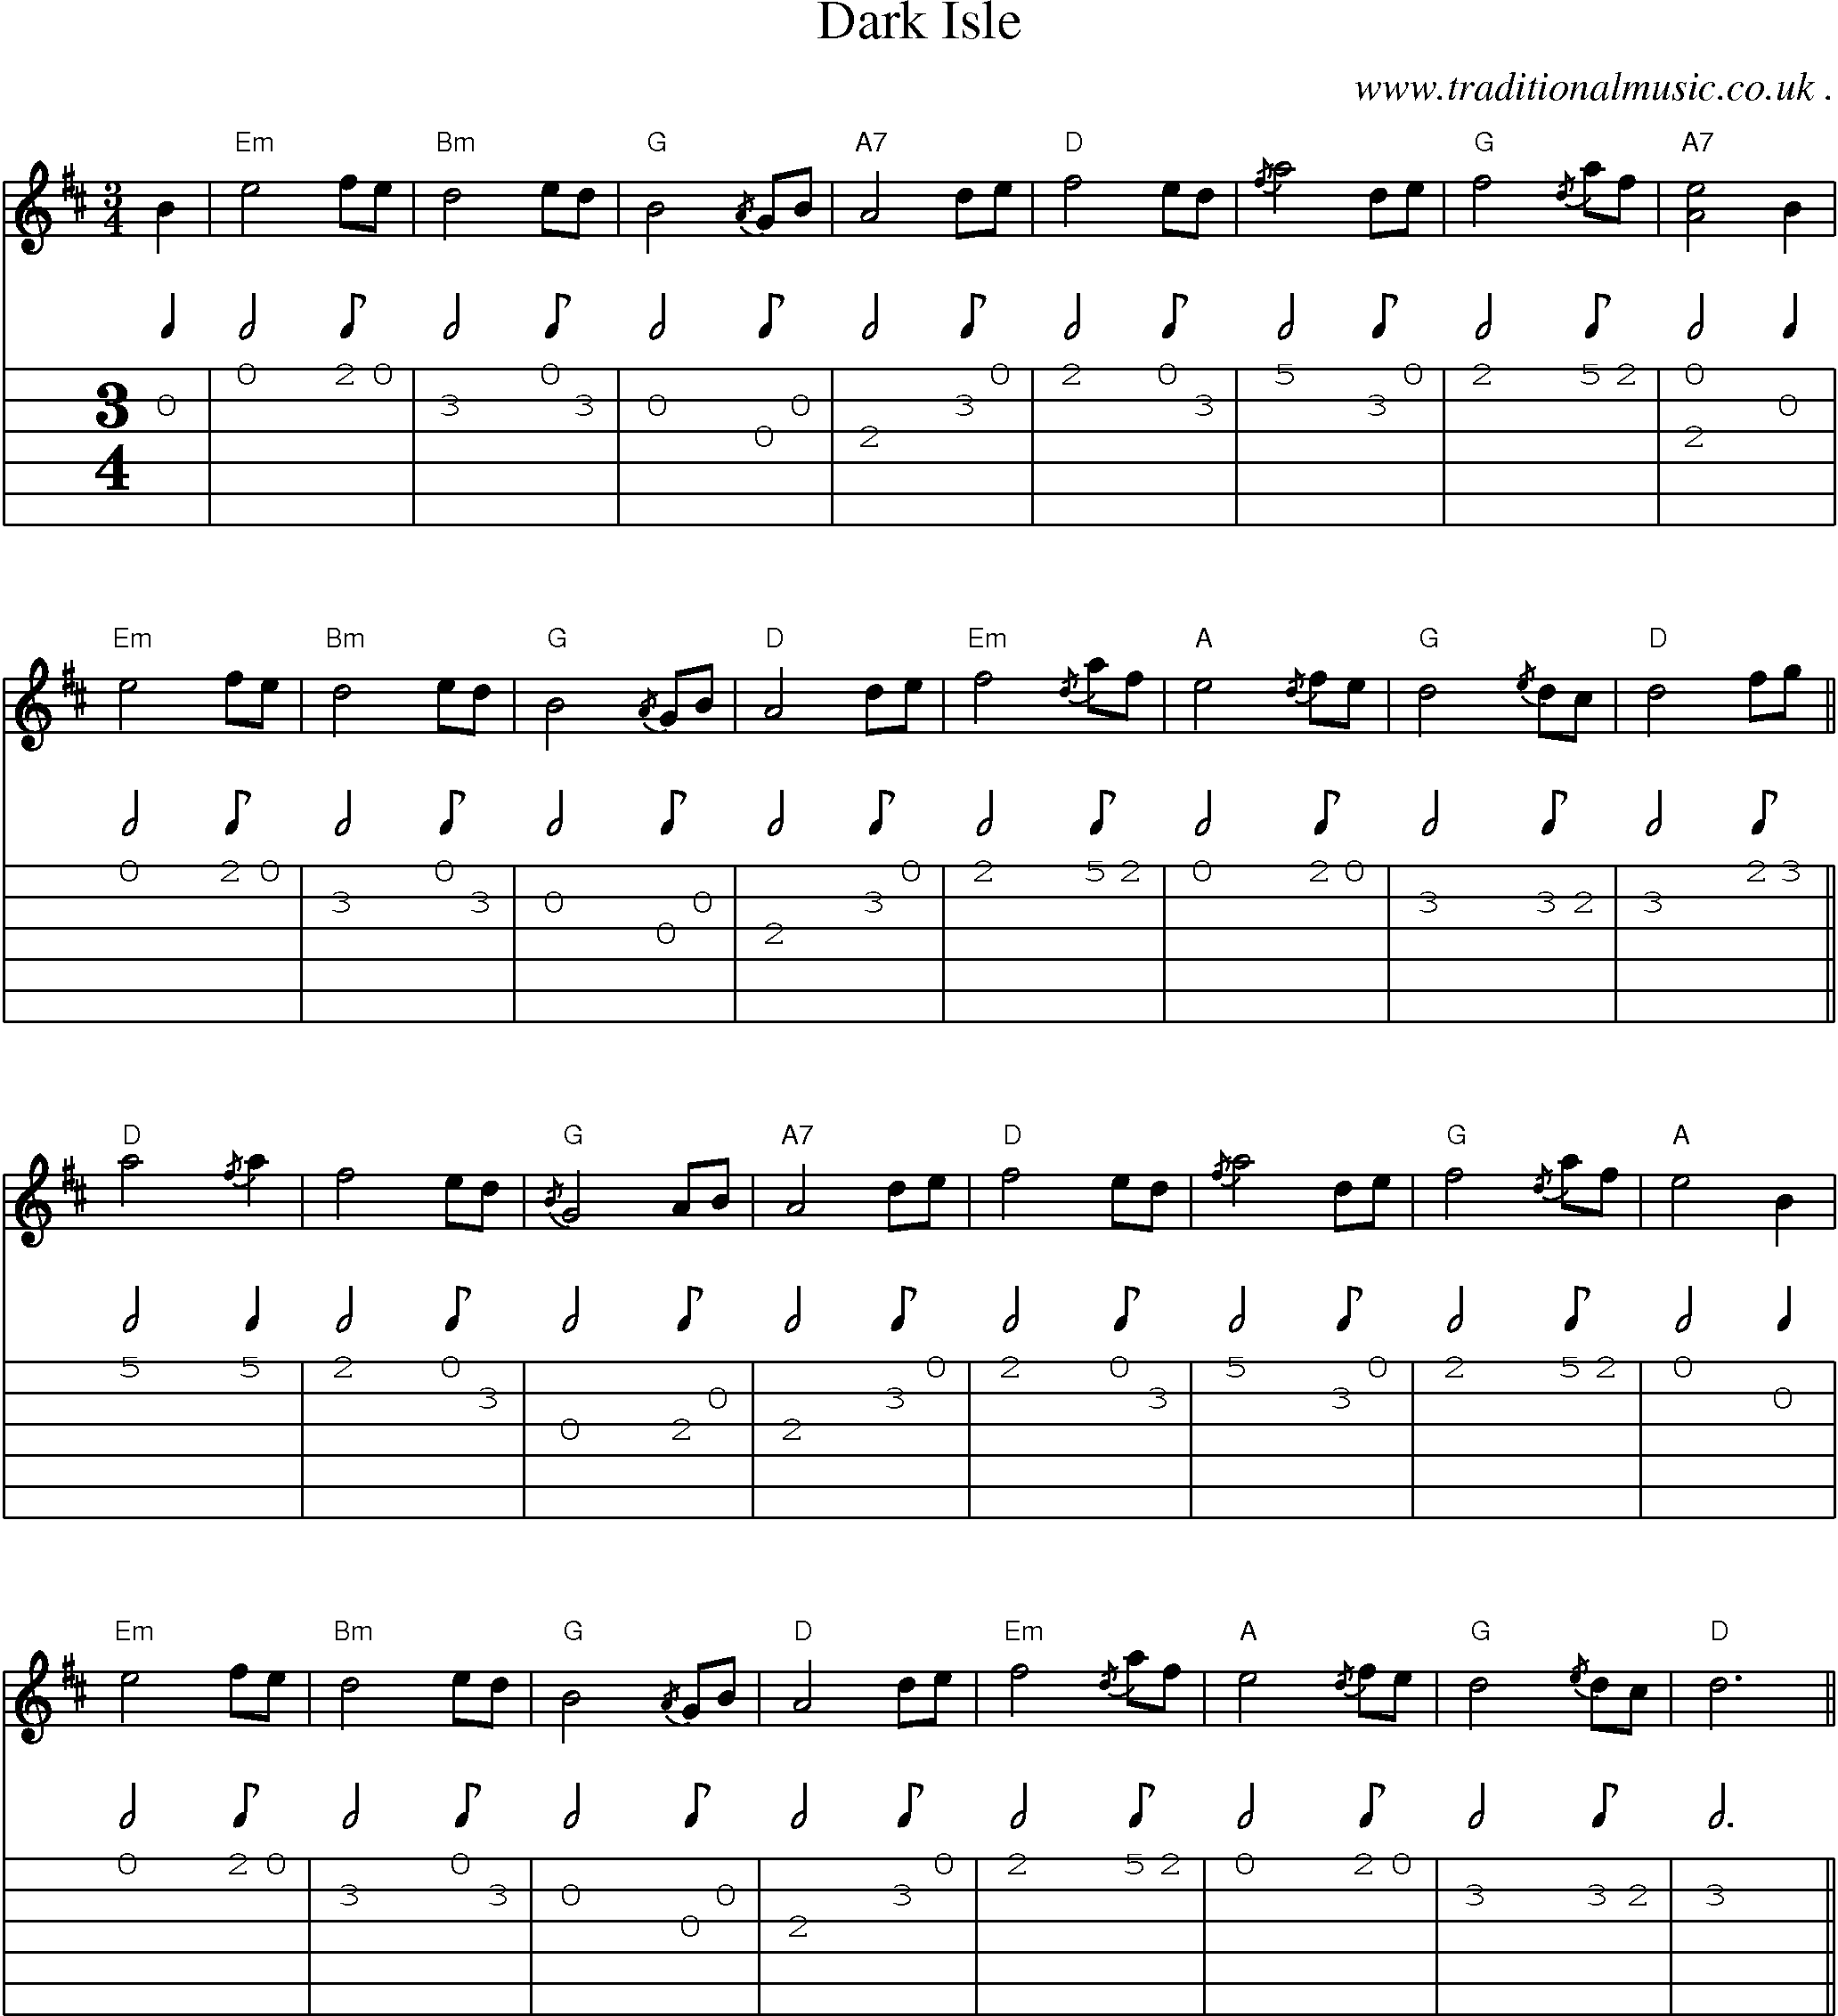 Music Score and Guitar Tabs for Dark Isle